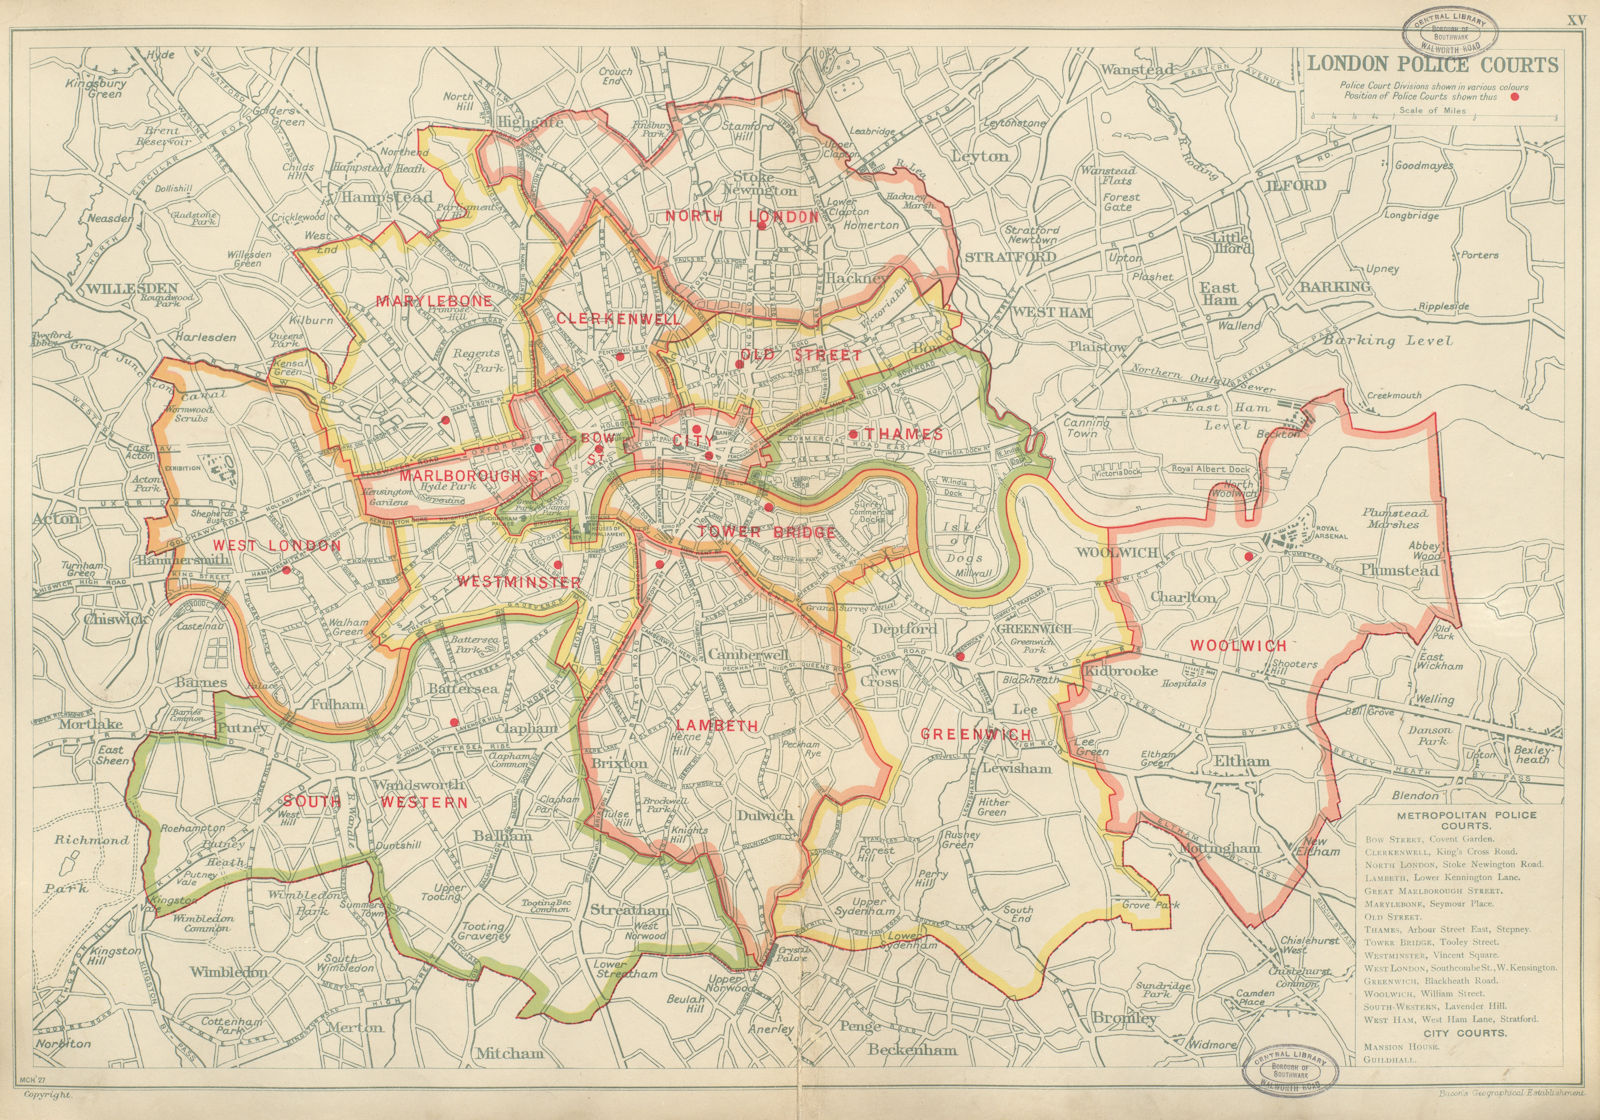 Associate Product LONDON POLICE COURTS with divisions & court locations. BACON 1934 old map